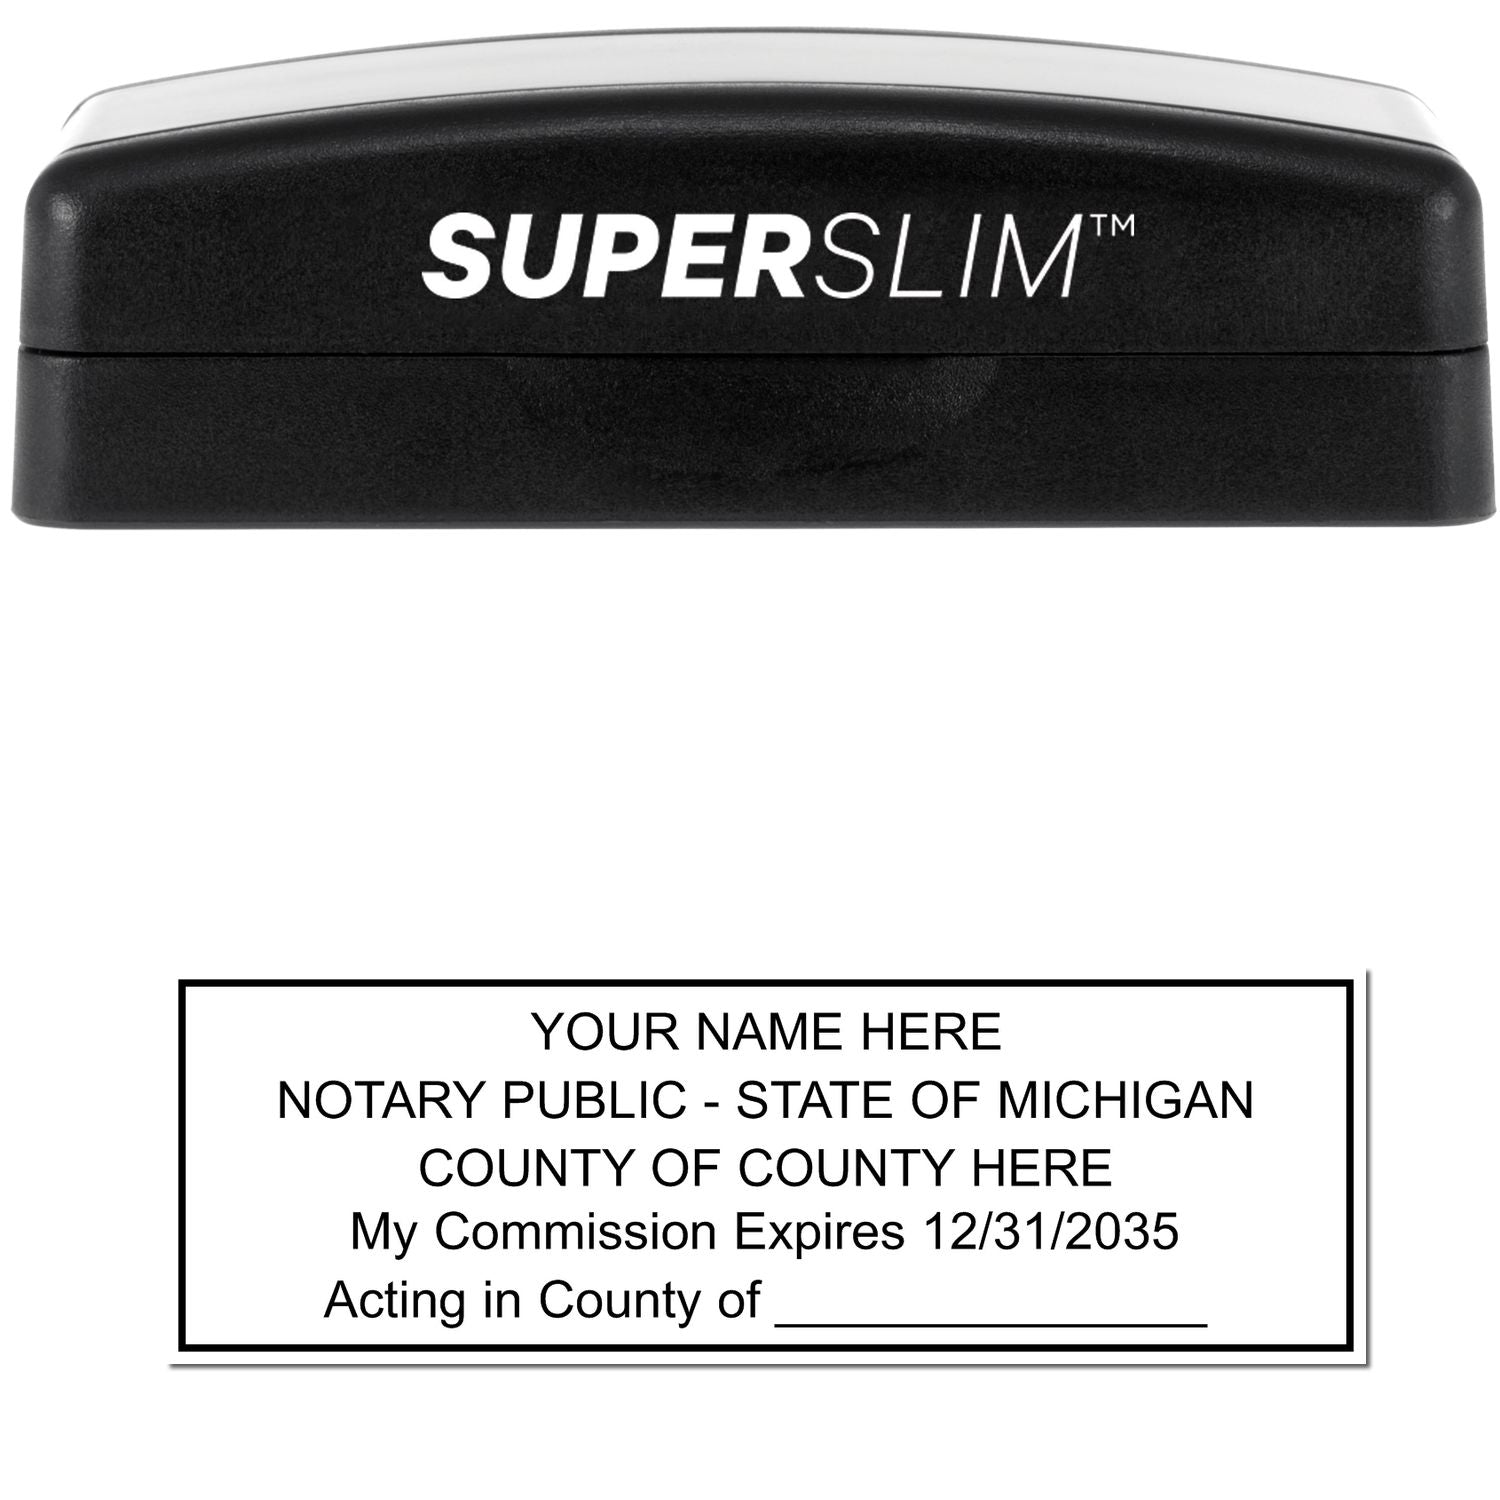 The main image for the Super Slim Michigan Notary Public Stamp depicting a sample of the imprint and electronic files